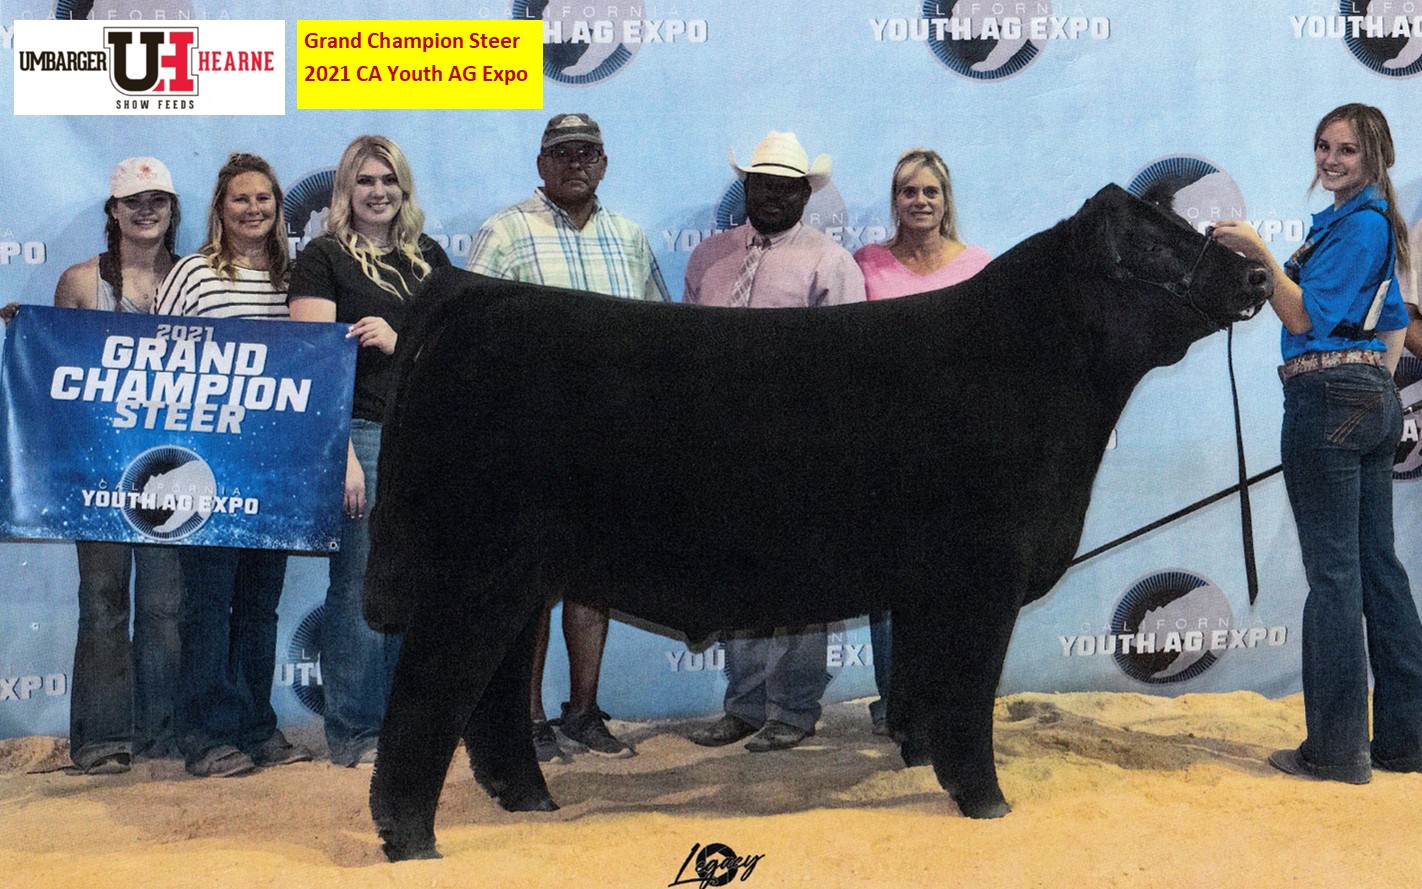 Grand Champion Steer 2021 CA Youth AG Expo